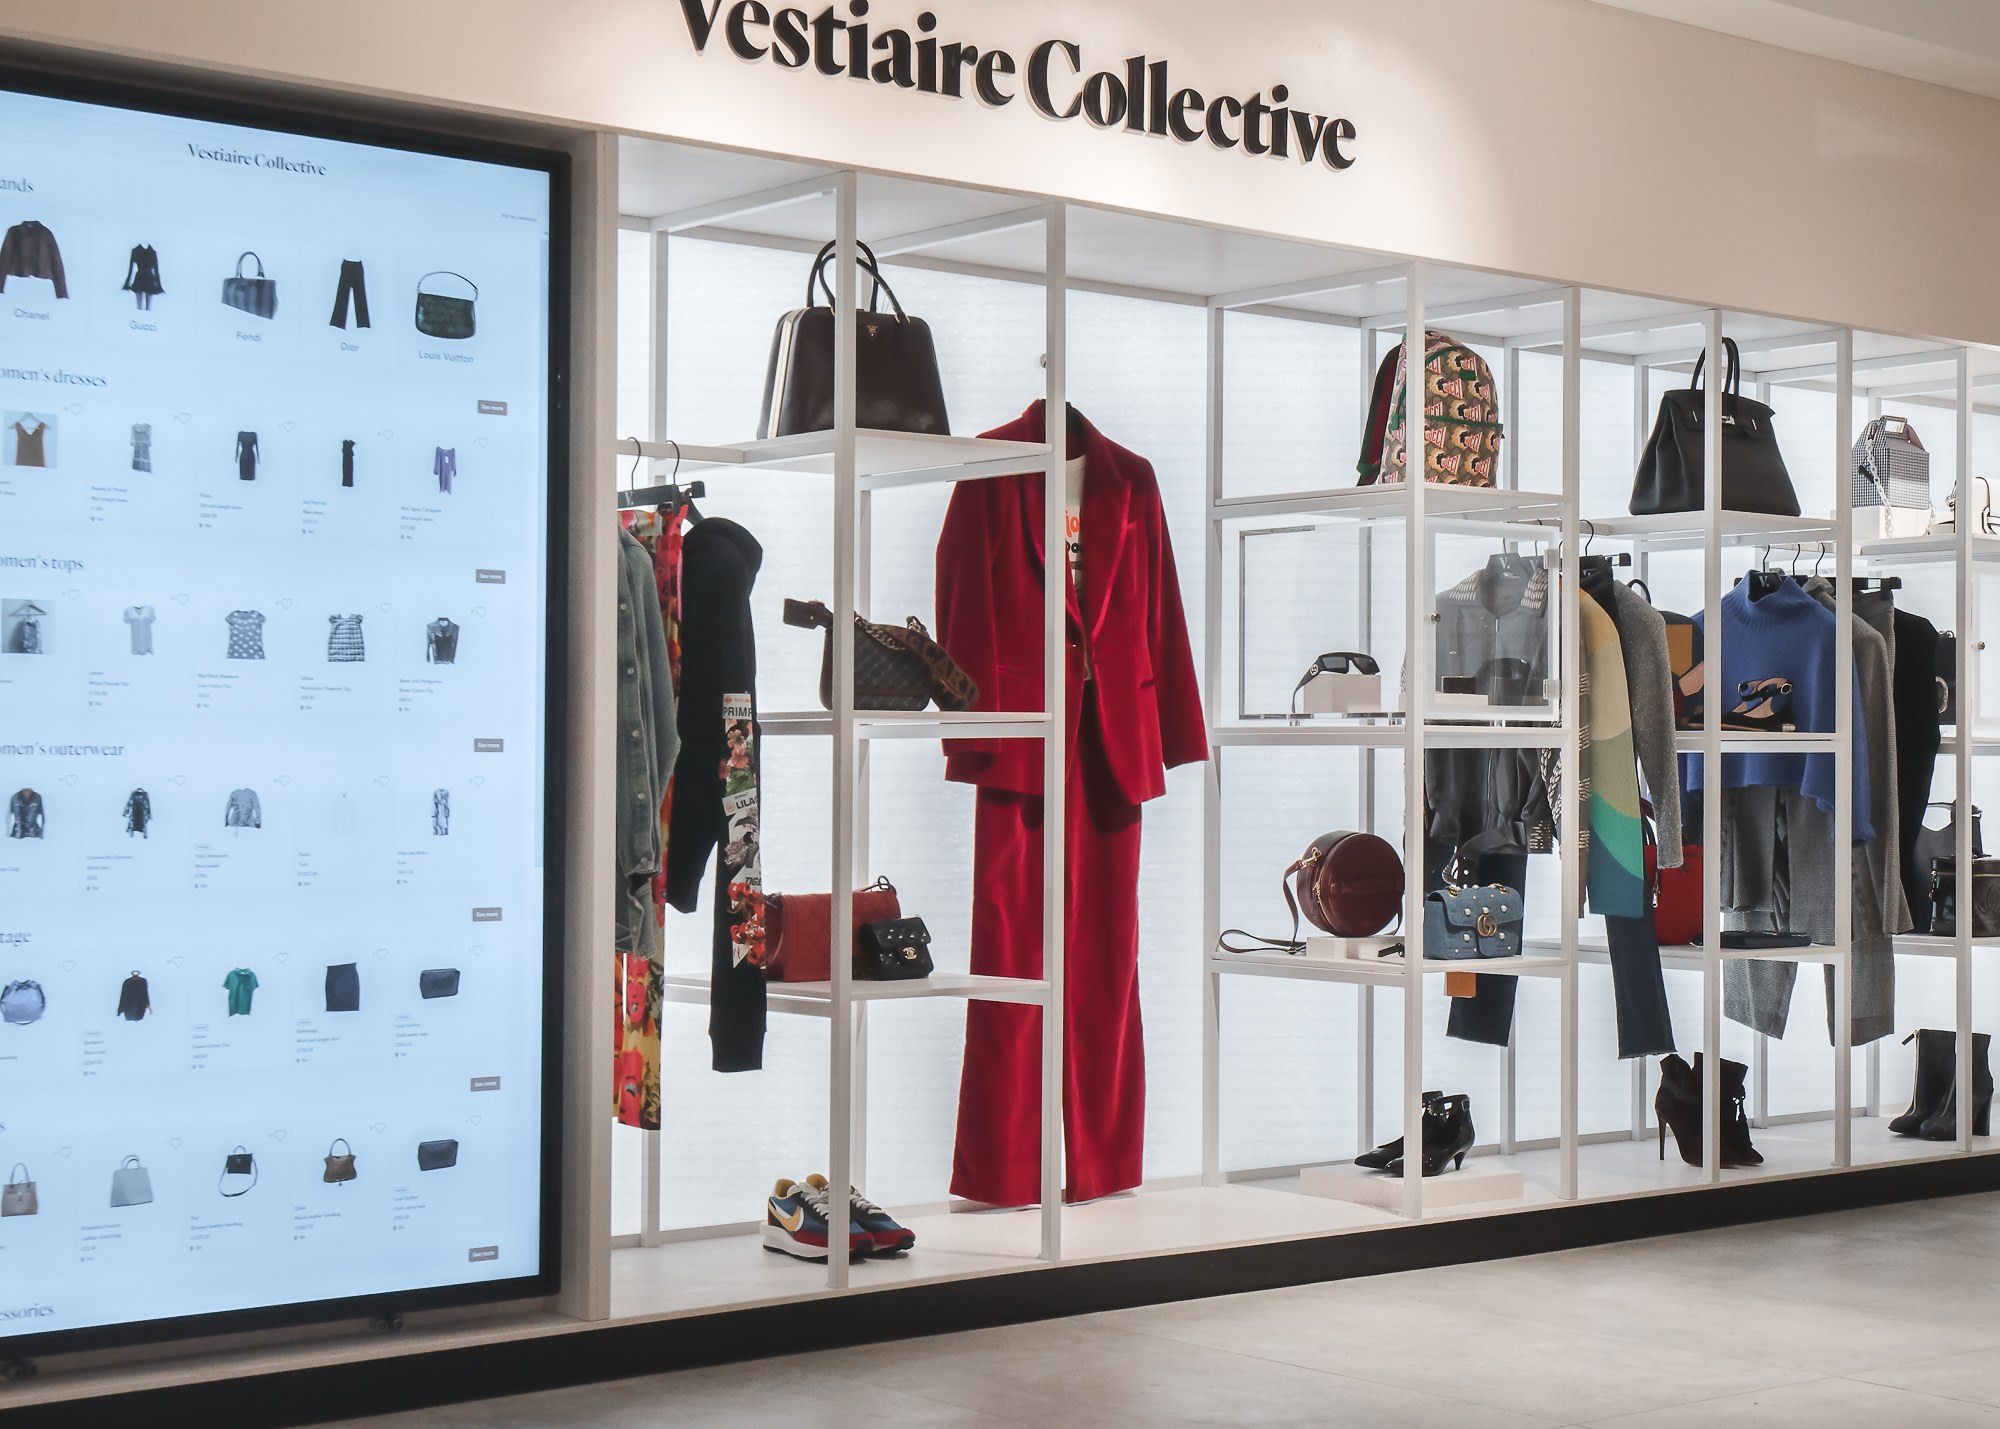 How sustainable is Vestiaire Collective's packaging? – Help Center